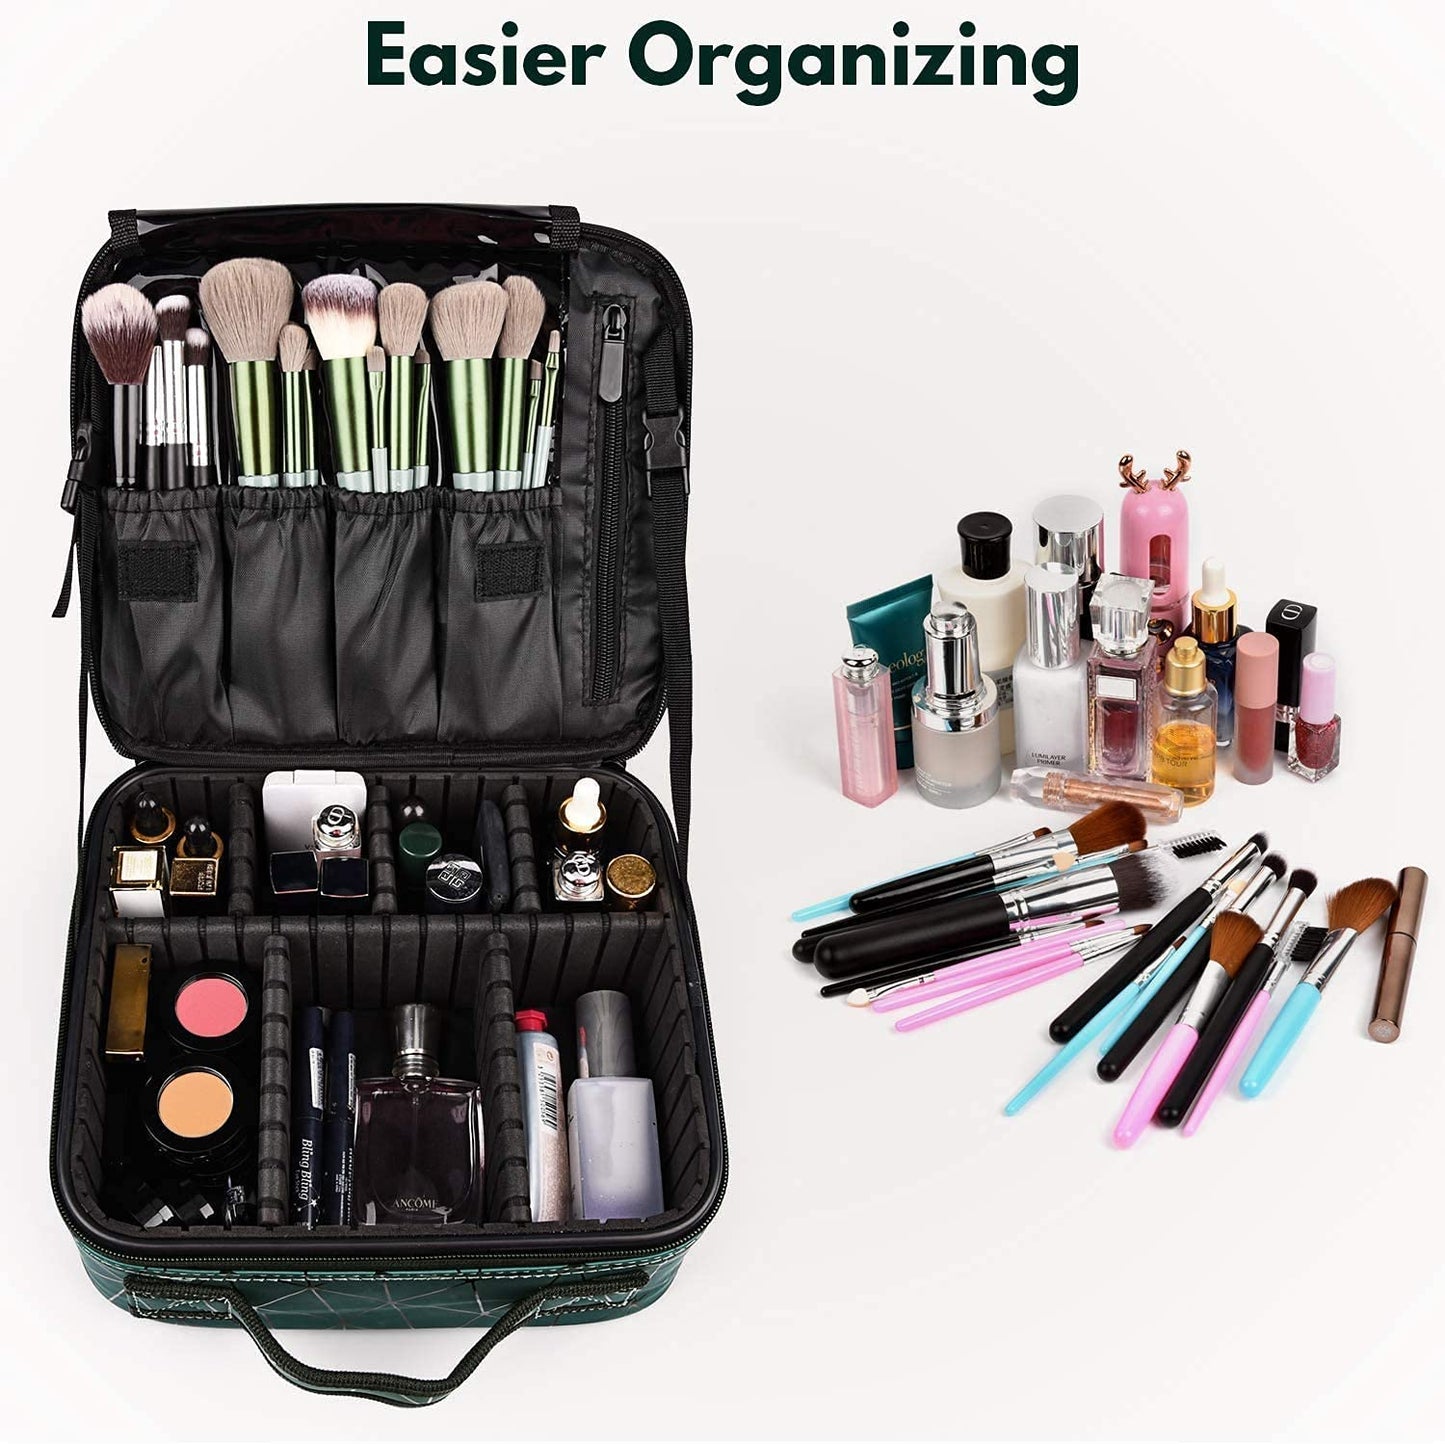 Cosmetic Storage Case with Adjustable Compartment (Geometric Stripe)